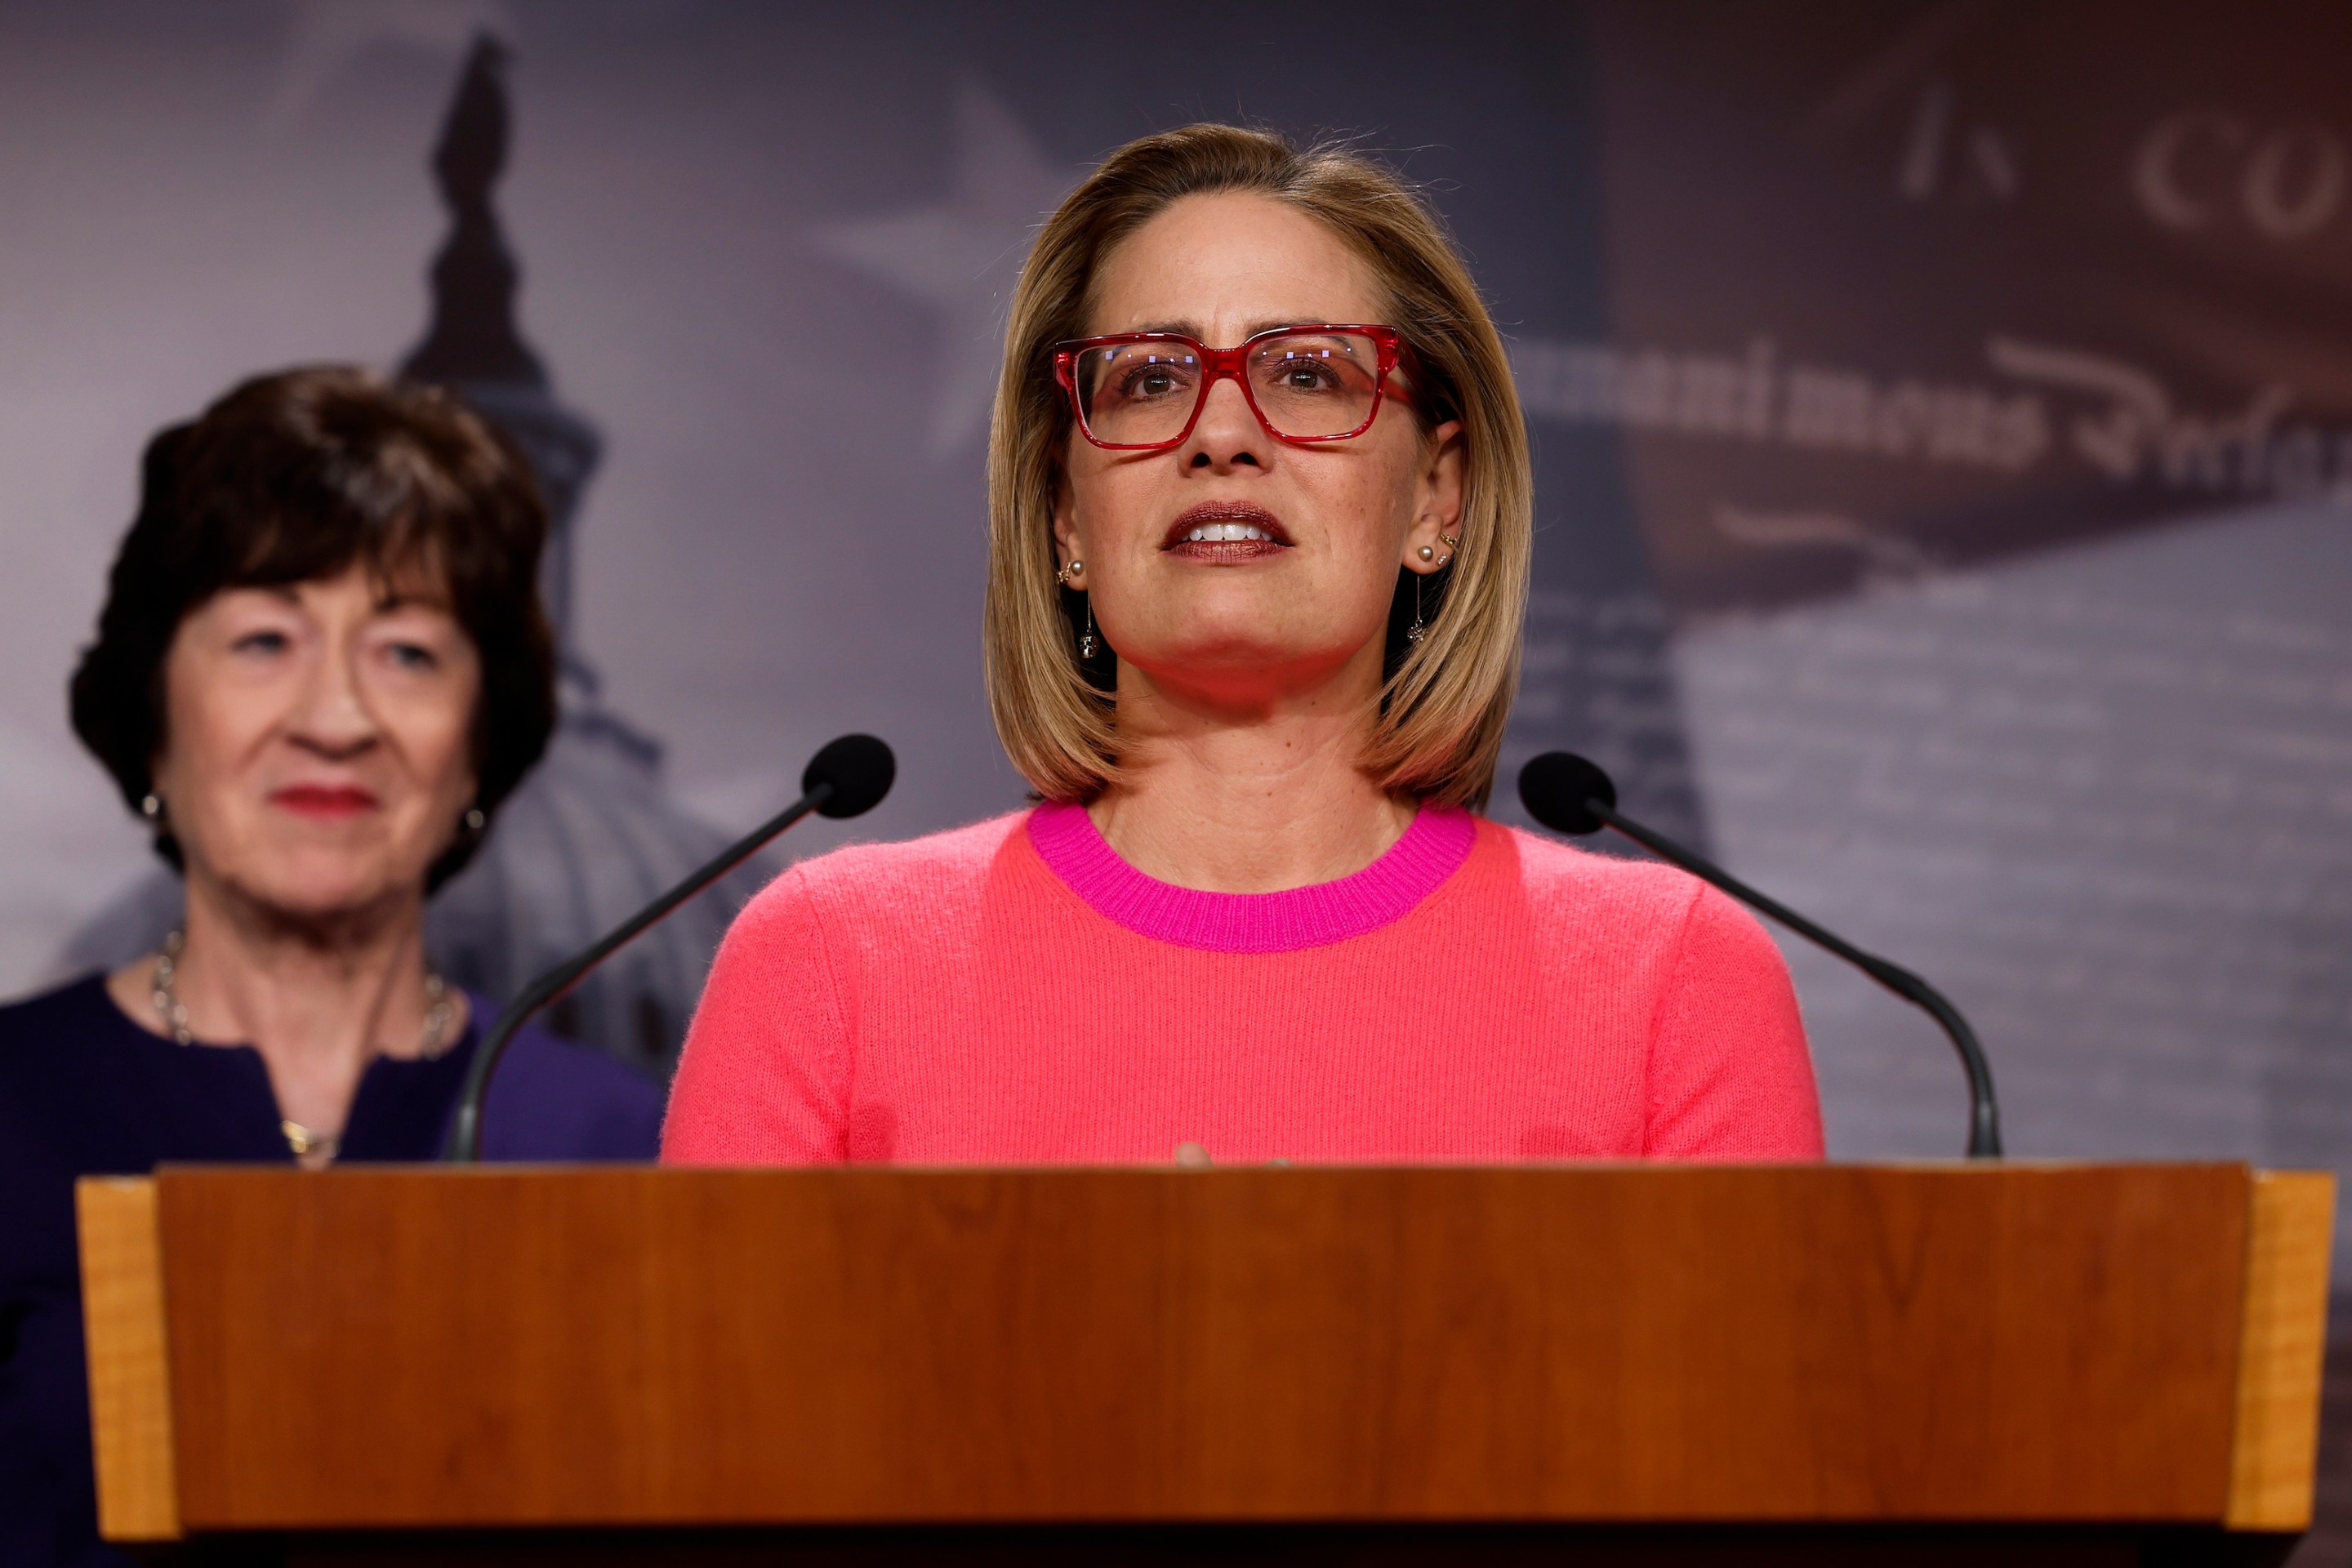 Sen. Kyrtsen Sinema (D-AZ) speaks at a news conference after the Senate passed the Respect for Marriage Act at the Capitol Building on November 29, 2022.